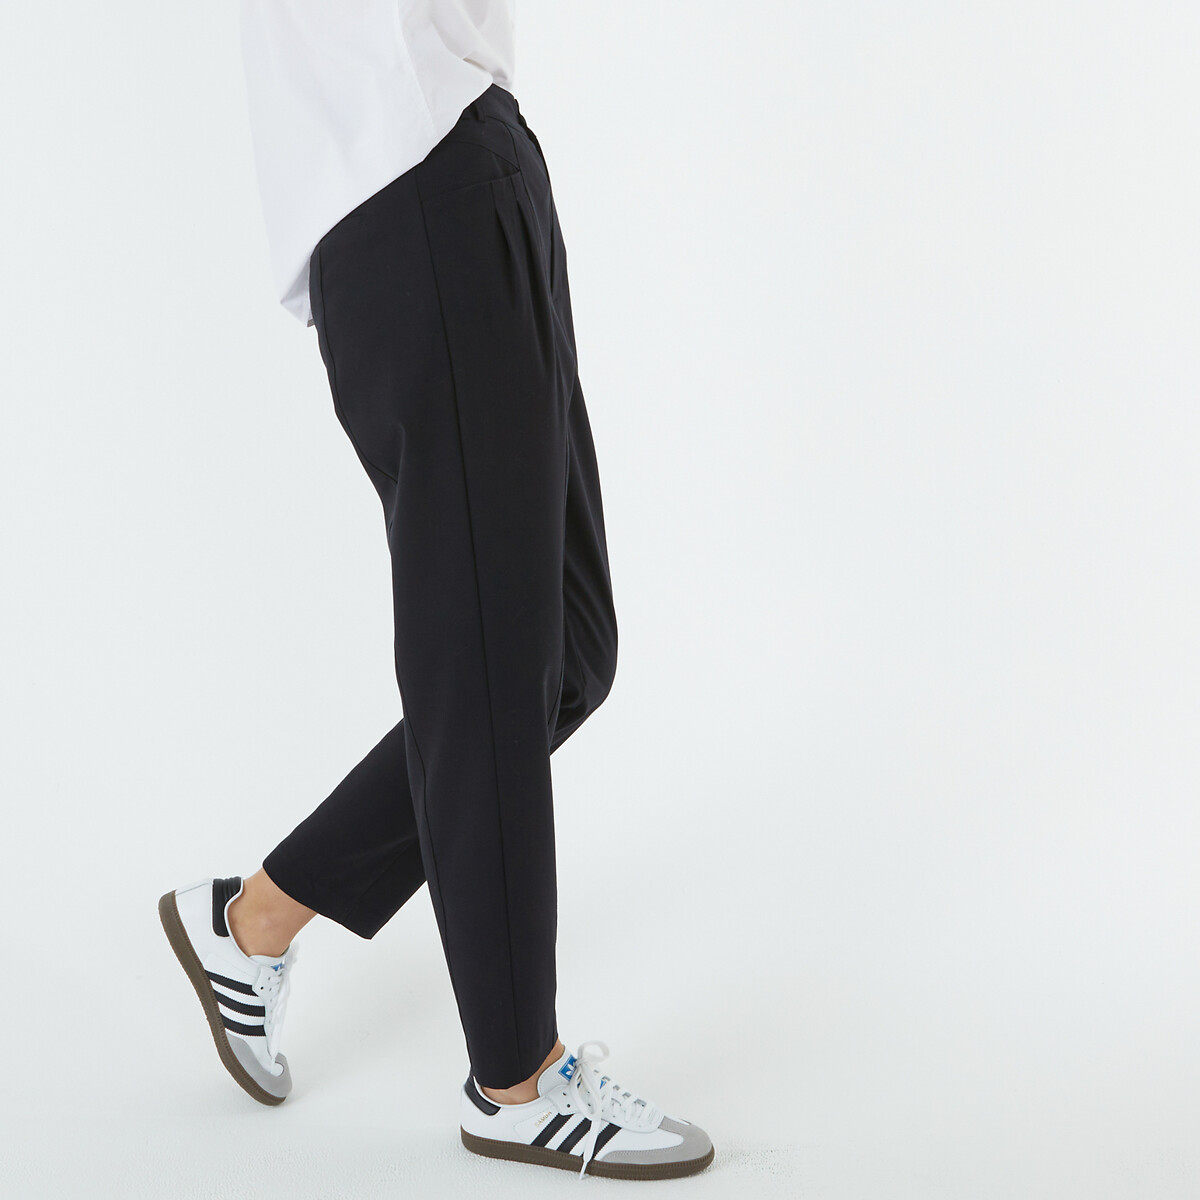 Straight Trousers, Length 28.5"